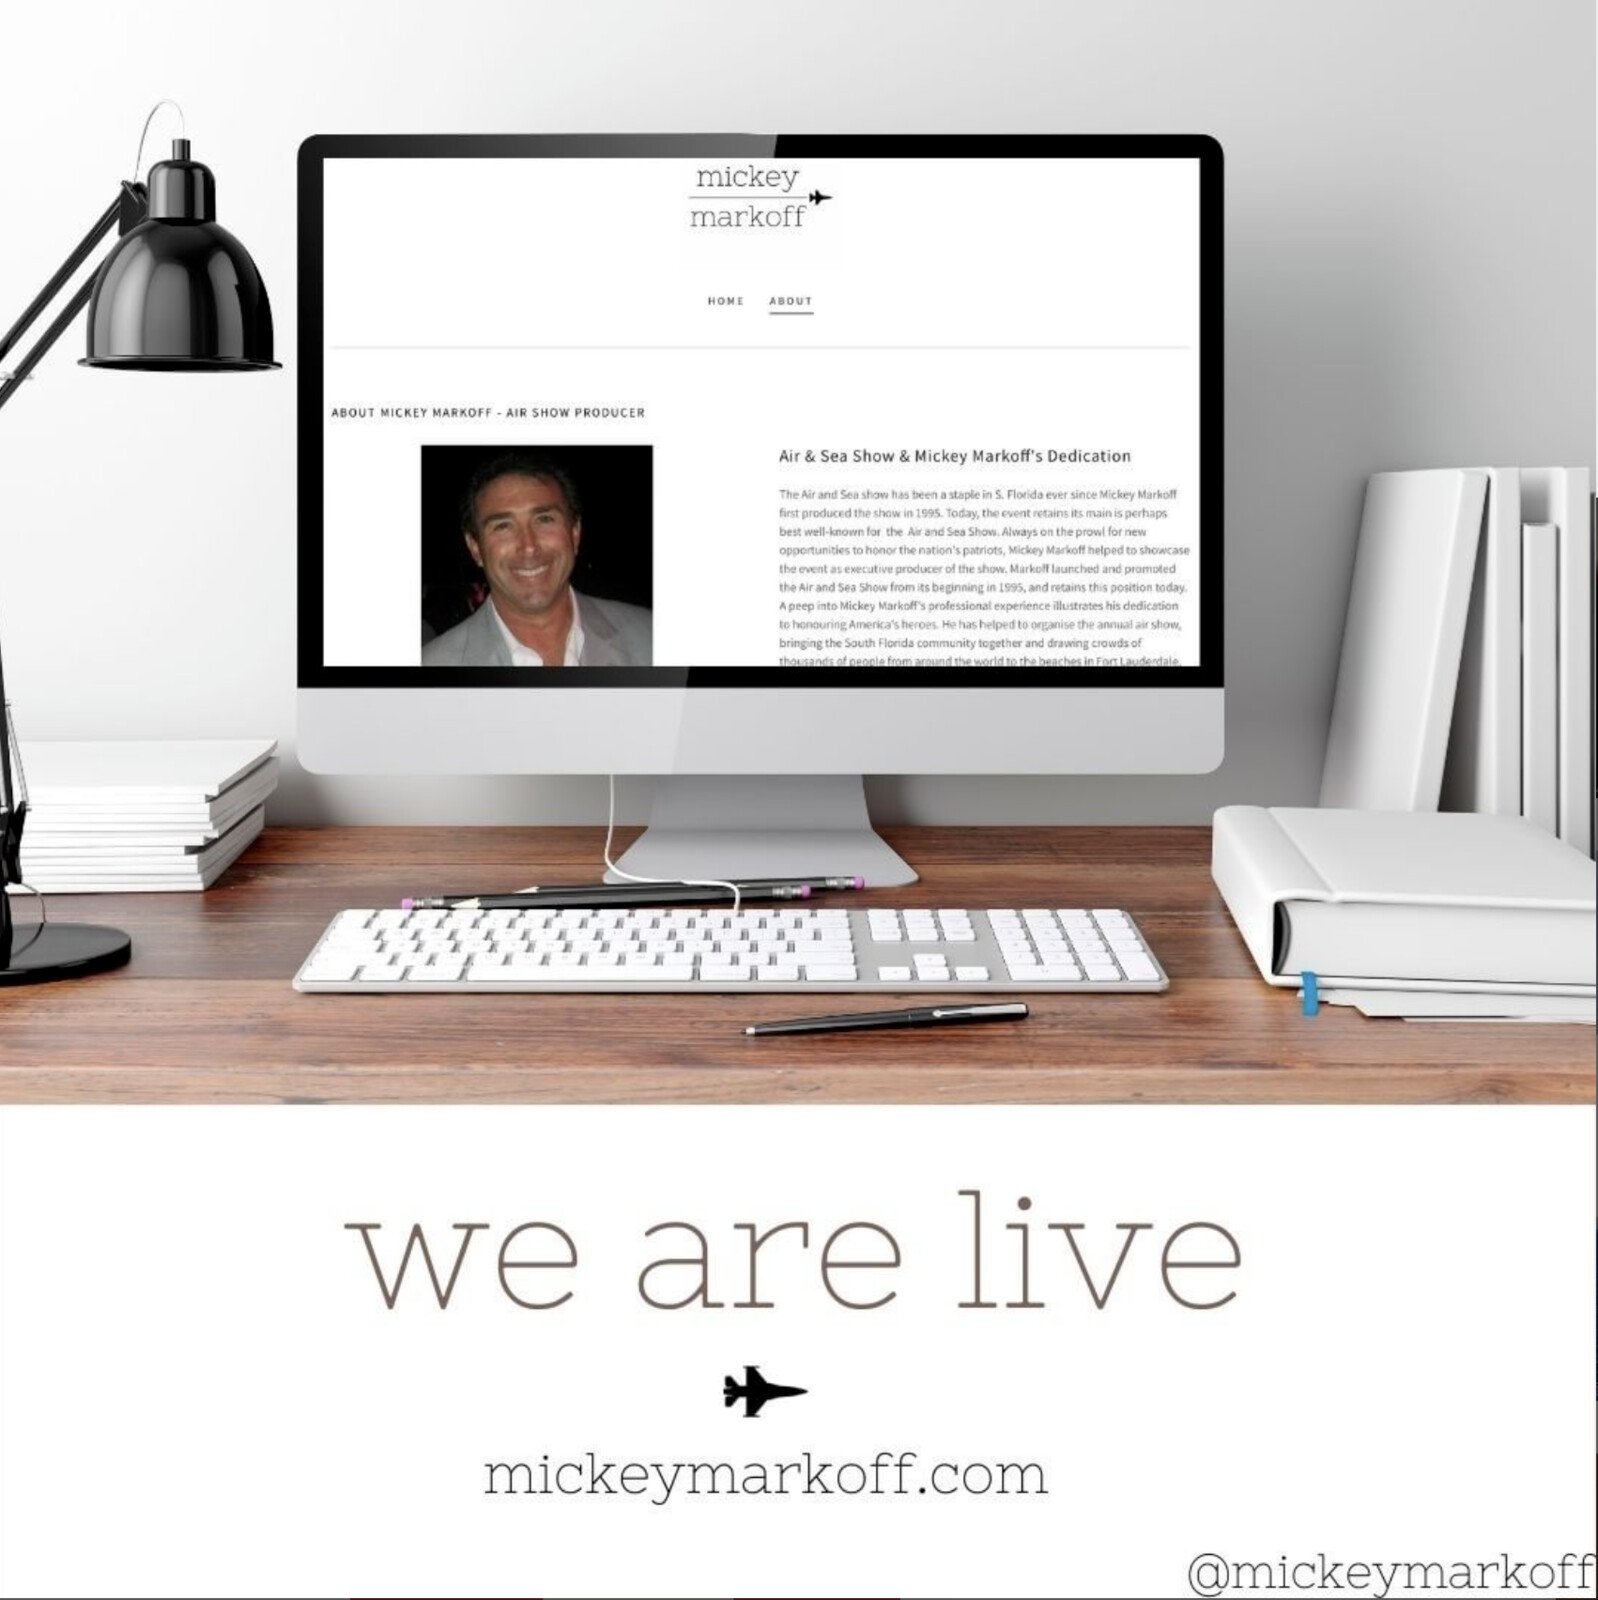 Mickey Markoff - Air and Sea Show Executive Producer - “New Website”
